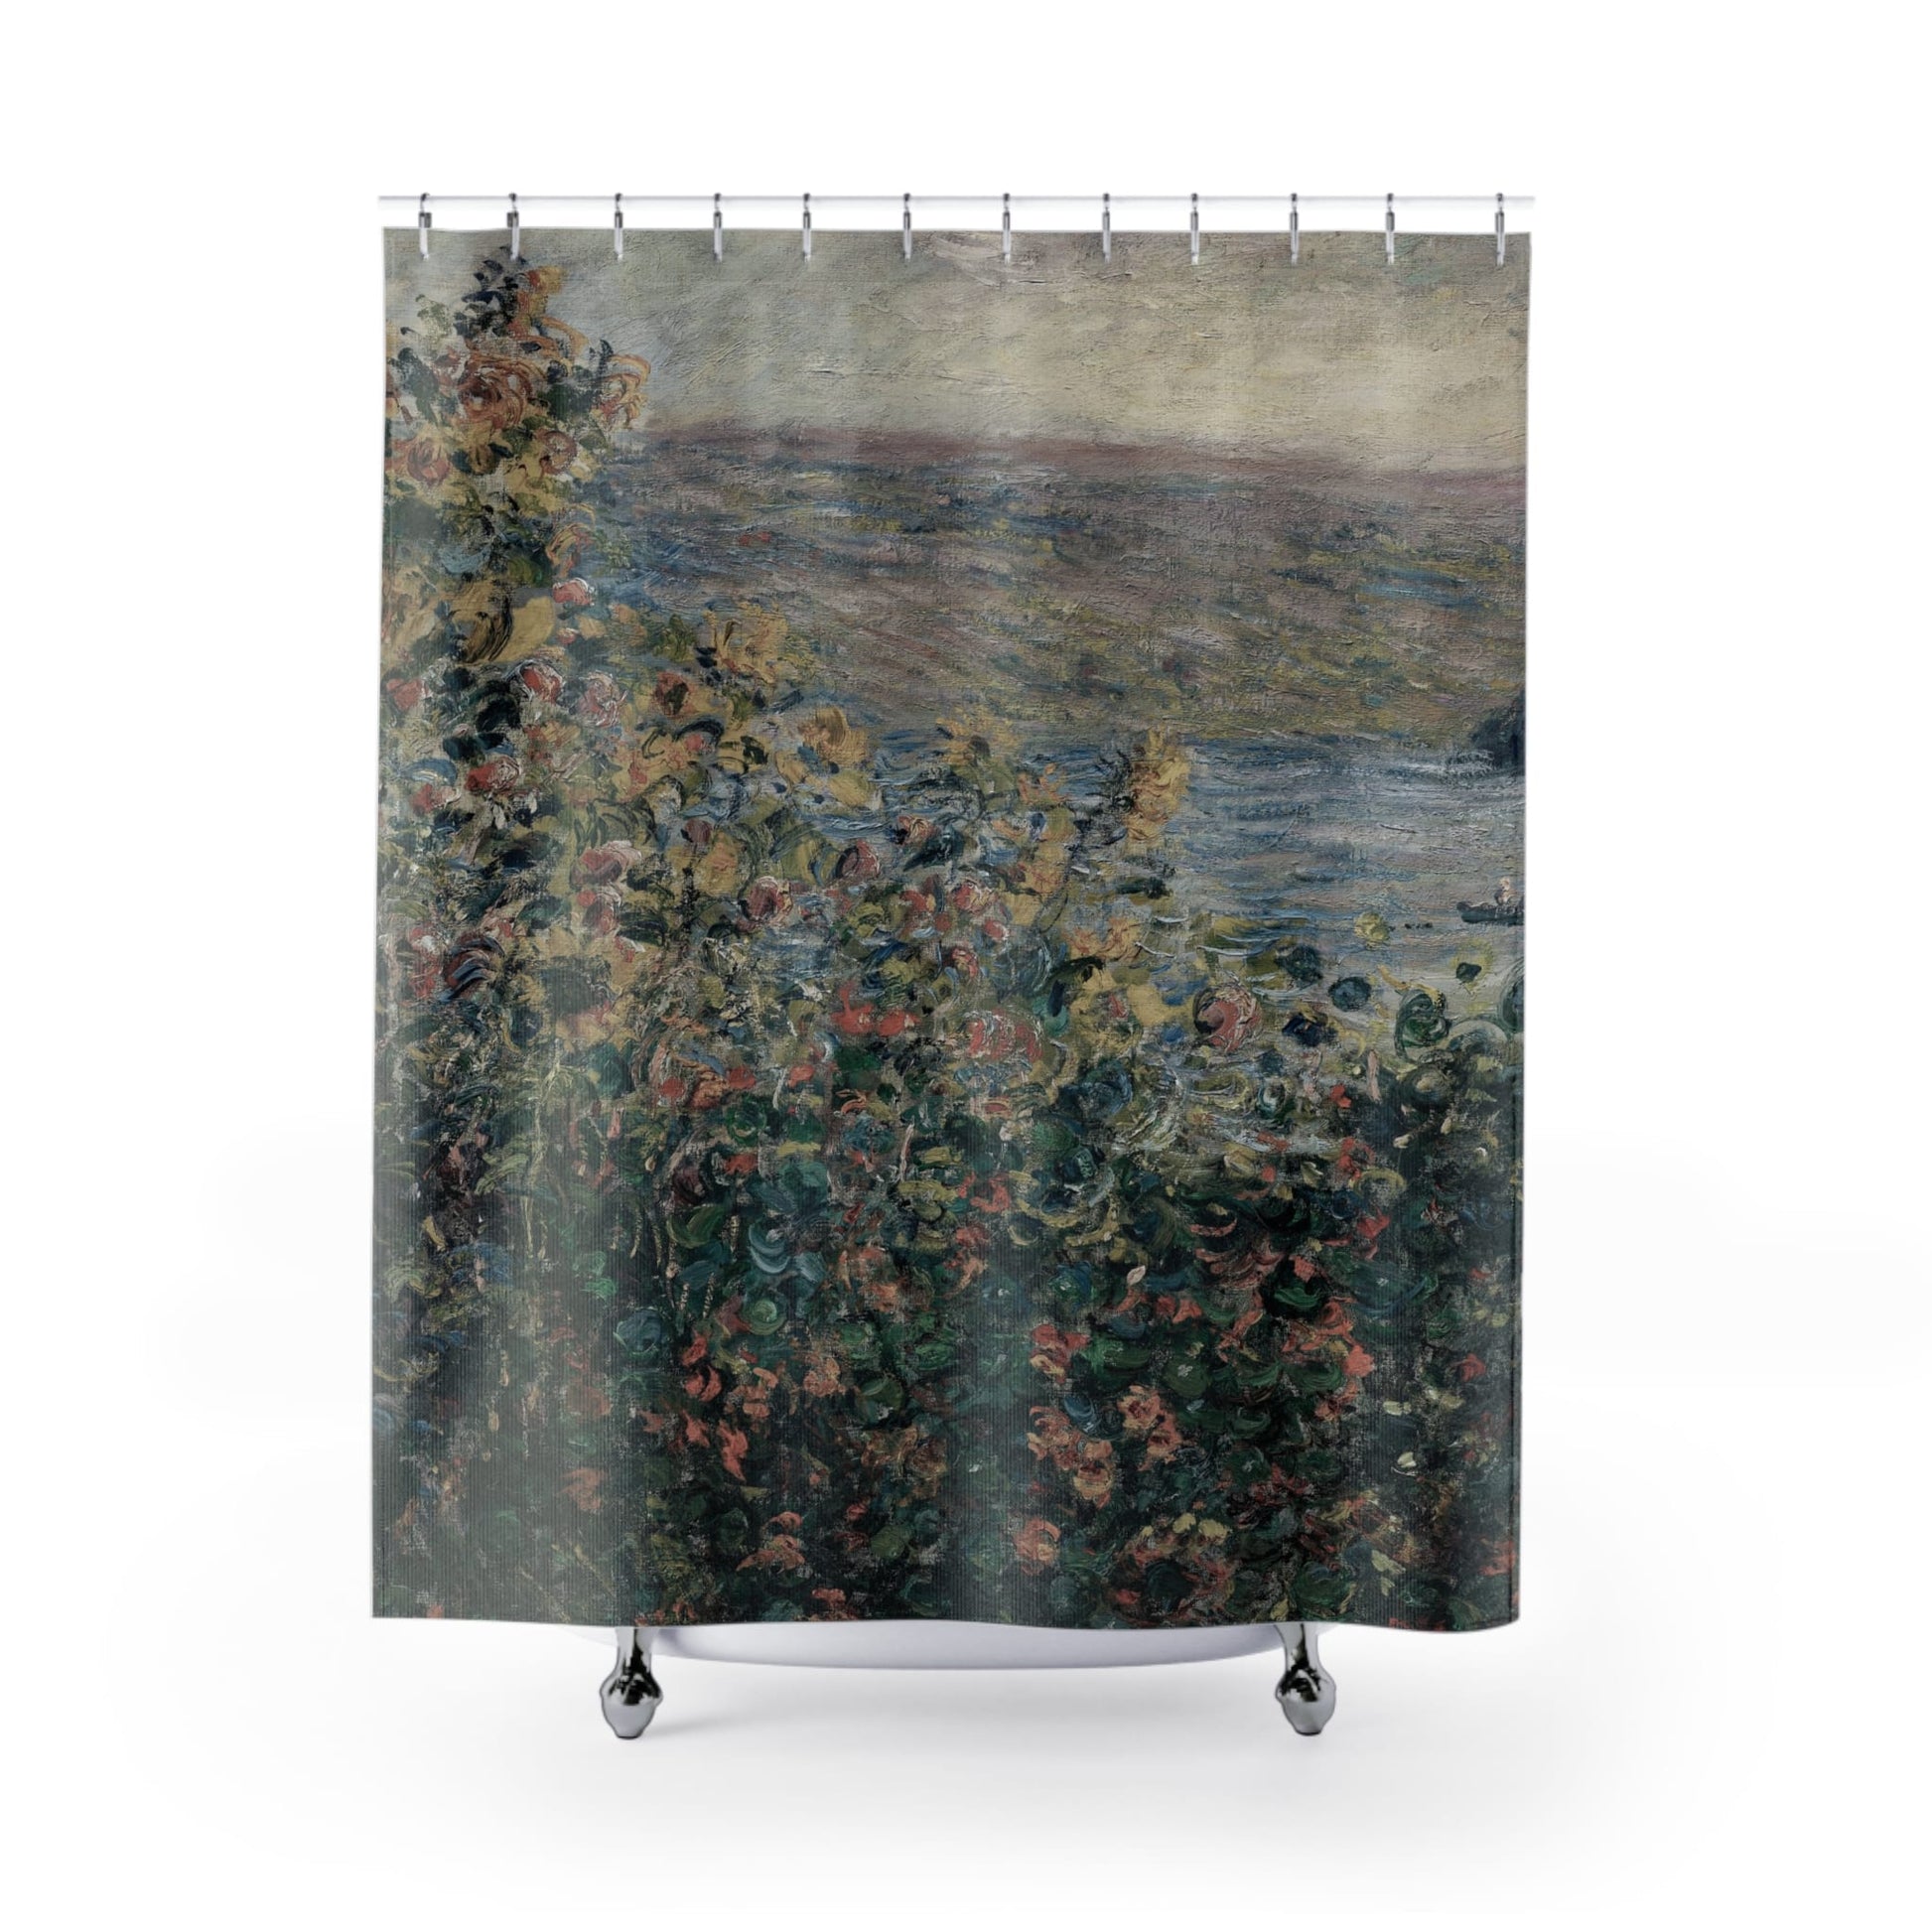 Muted Floral Shower Curtain with Claude Monet design, artistic bathroom decor featuring Monet's floral artwork.